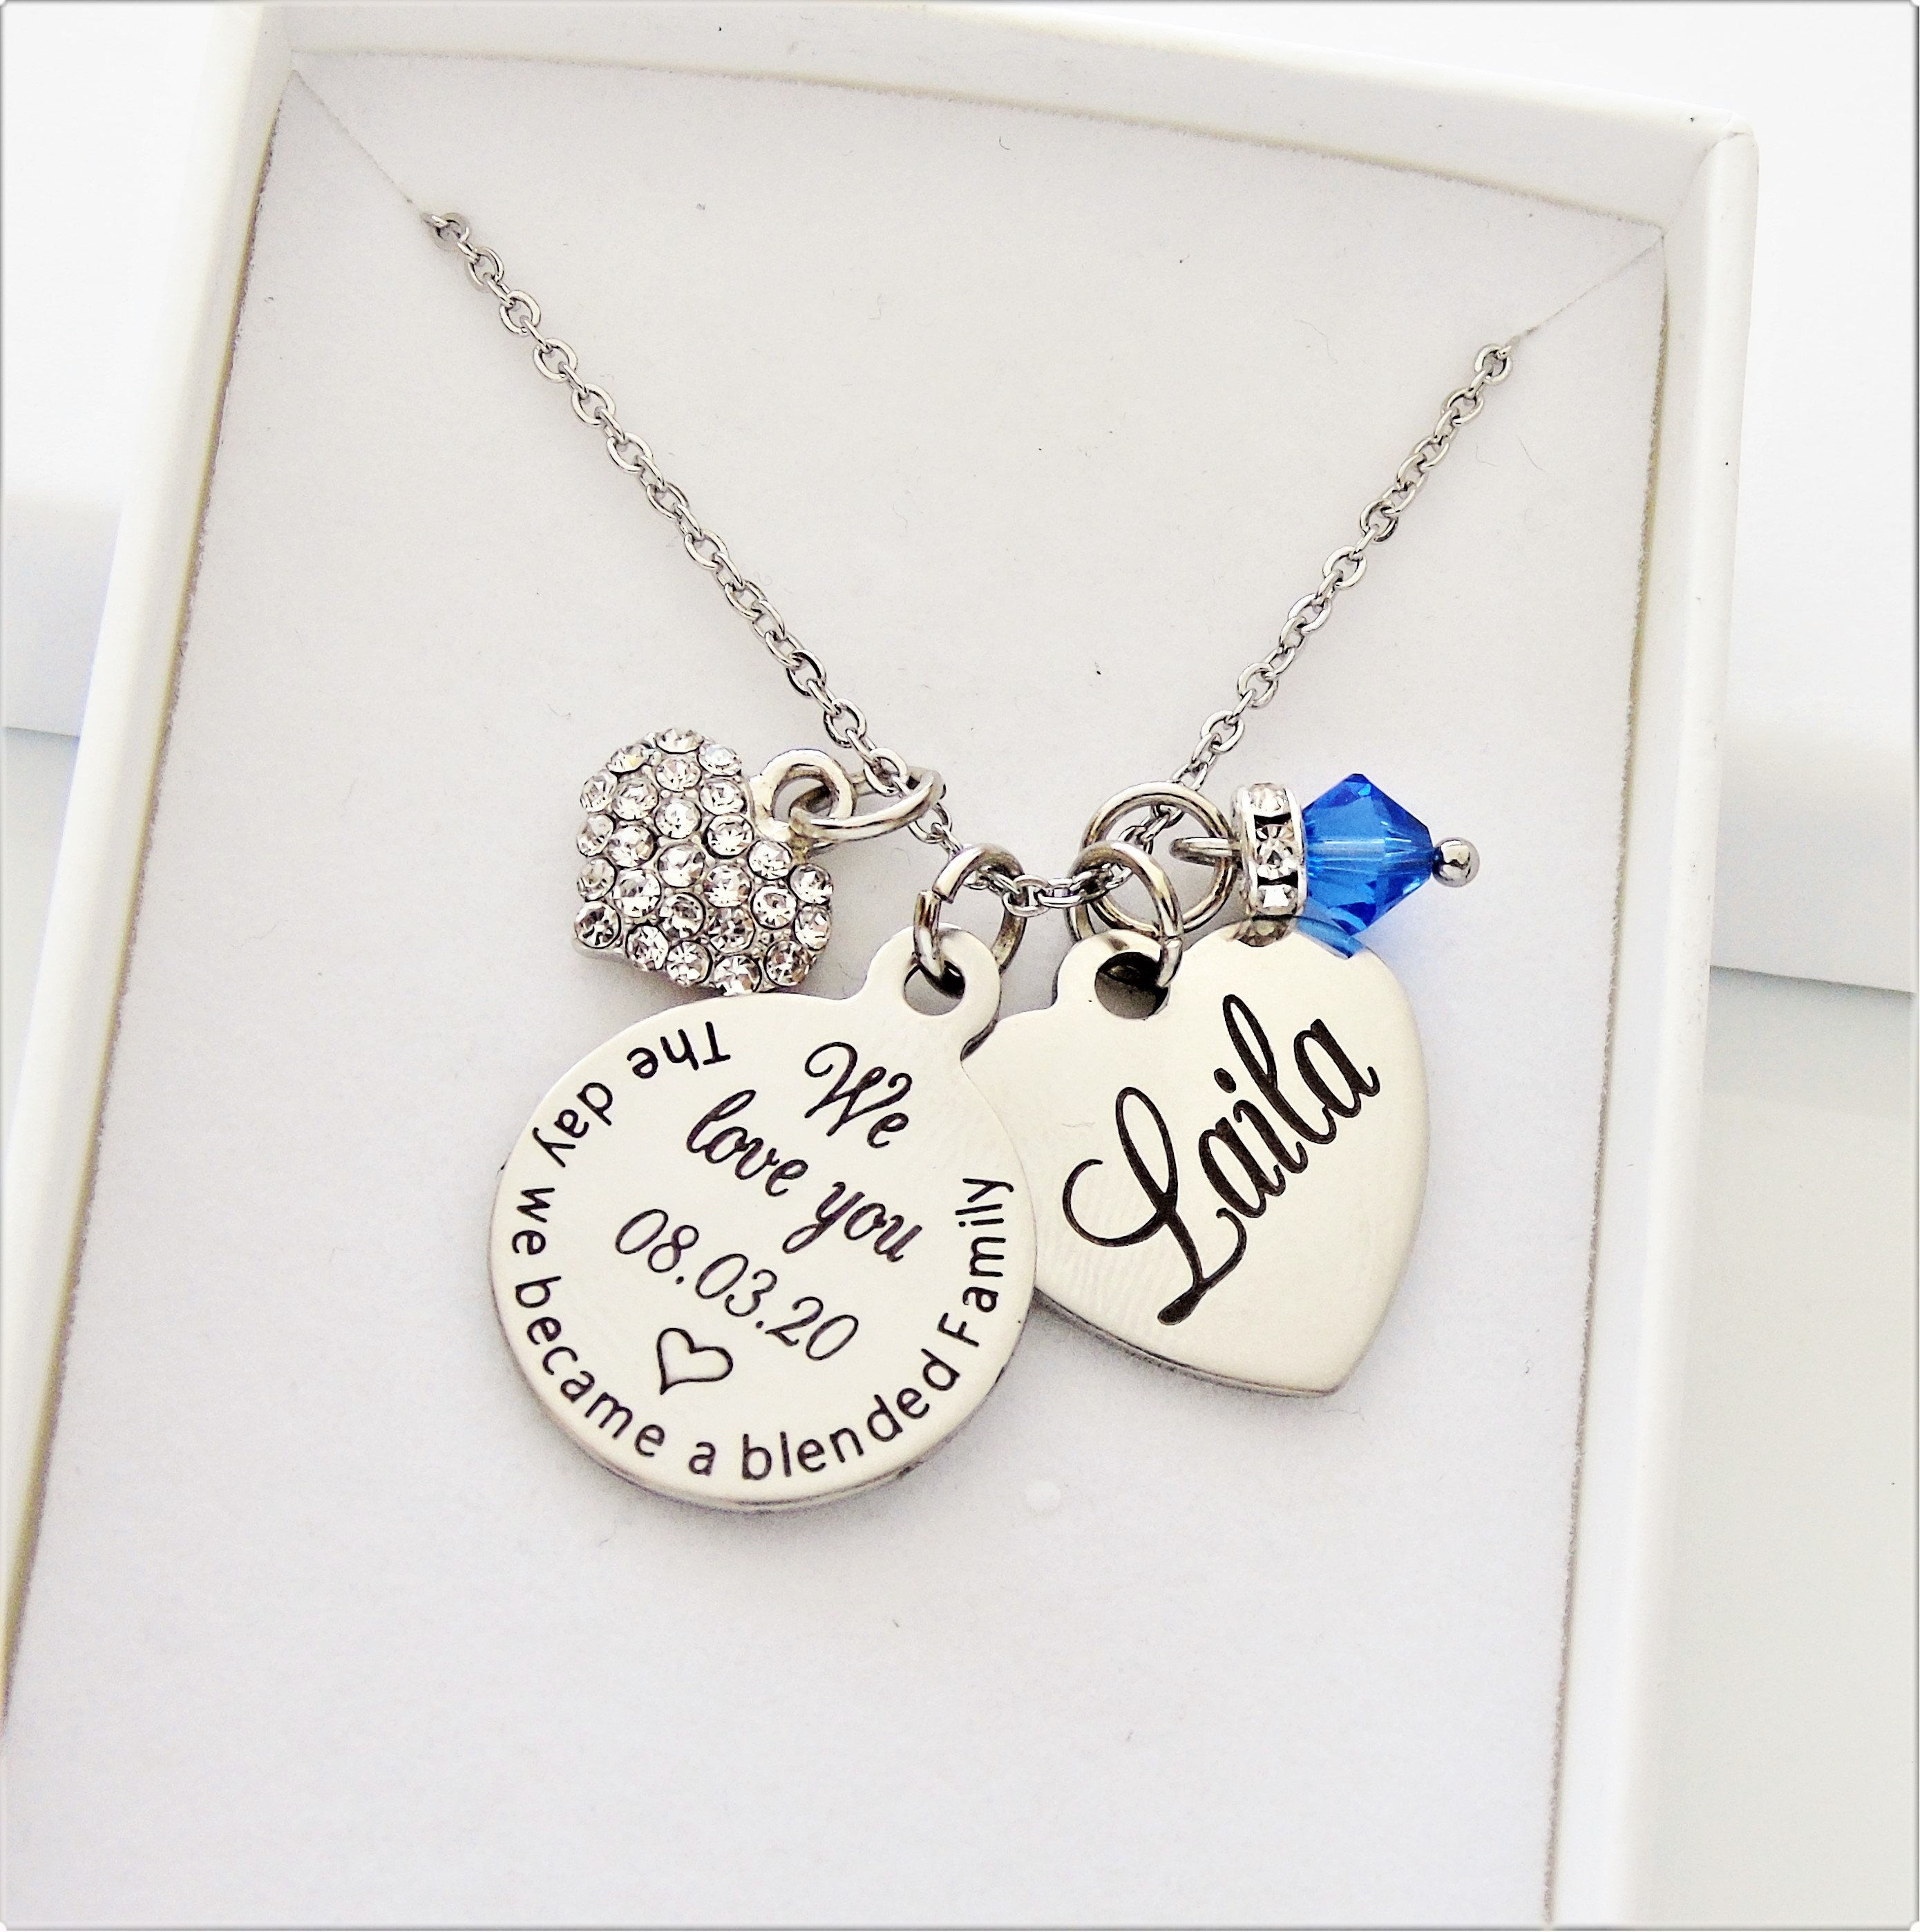 Blended Family, Stepdaughter Gift From Stepmother , Personalized Necklace, Step Daughter Jewelry Stepfather For Wedding